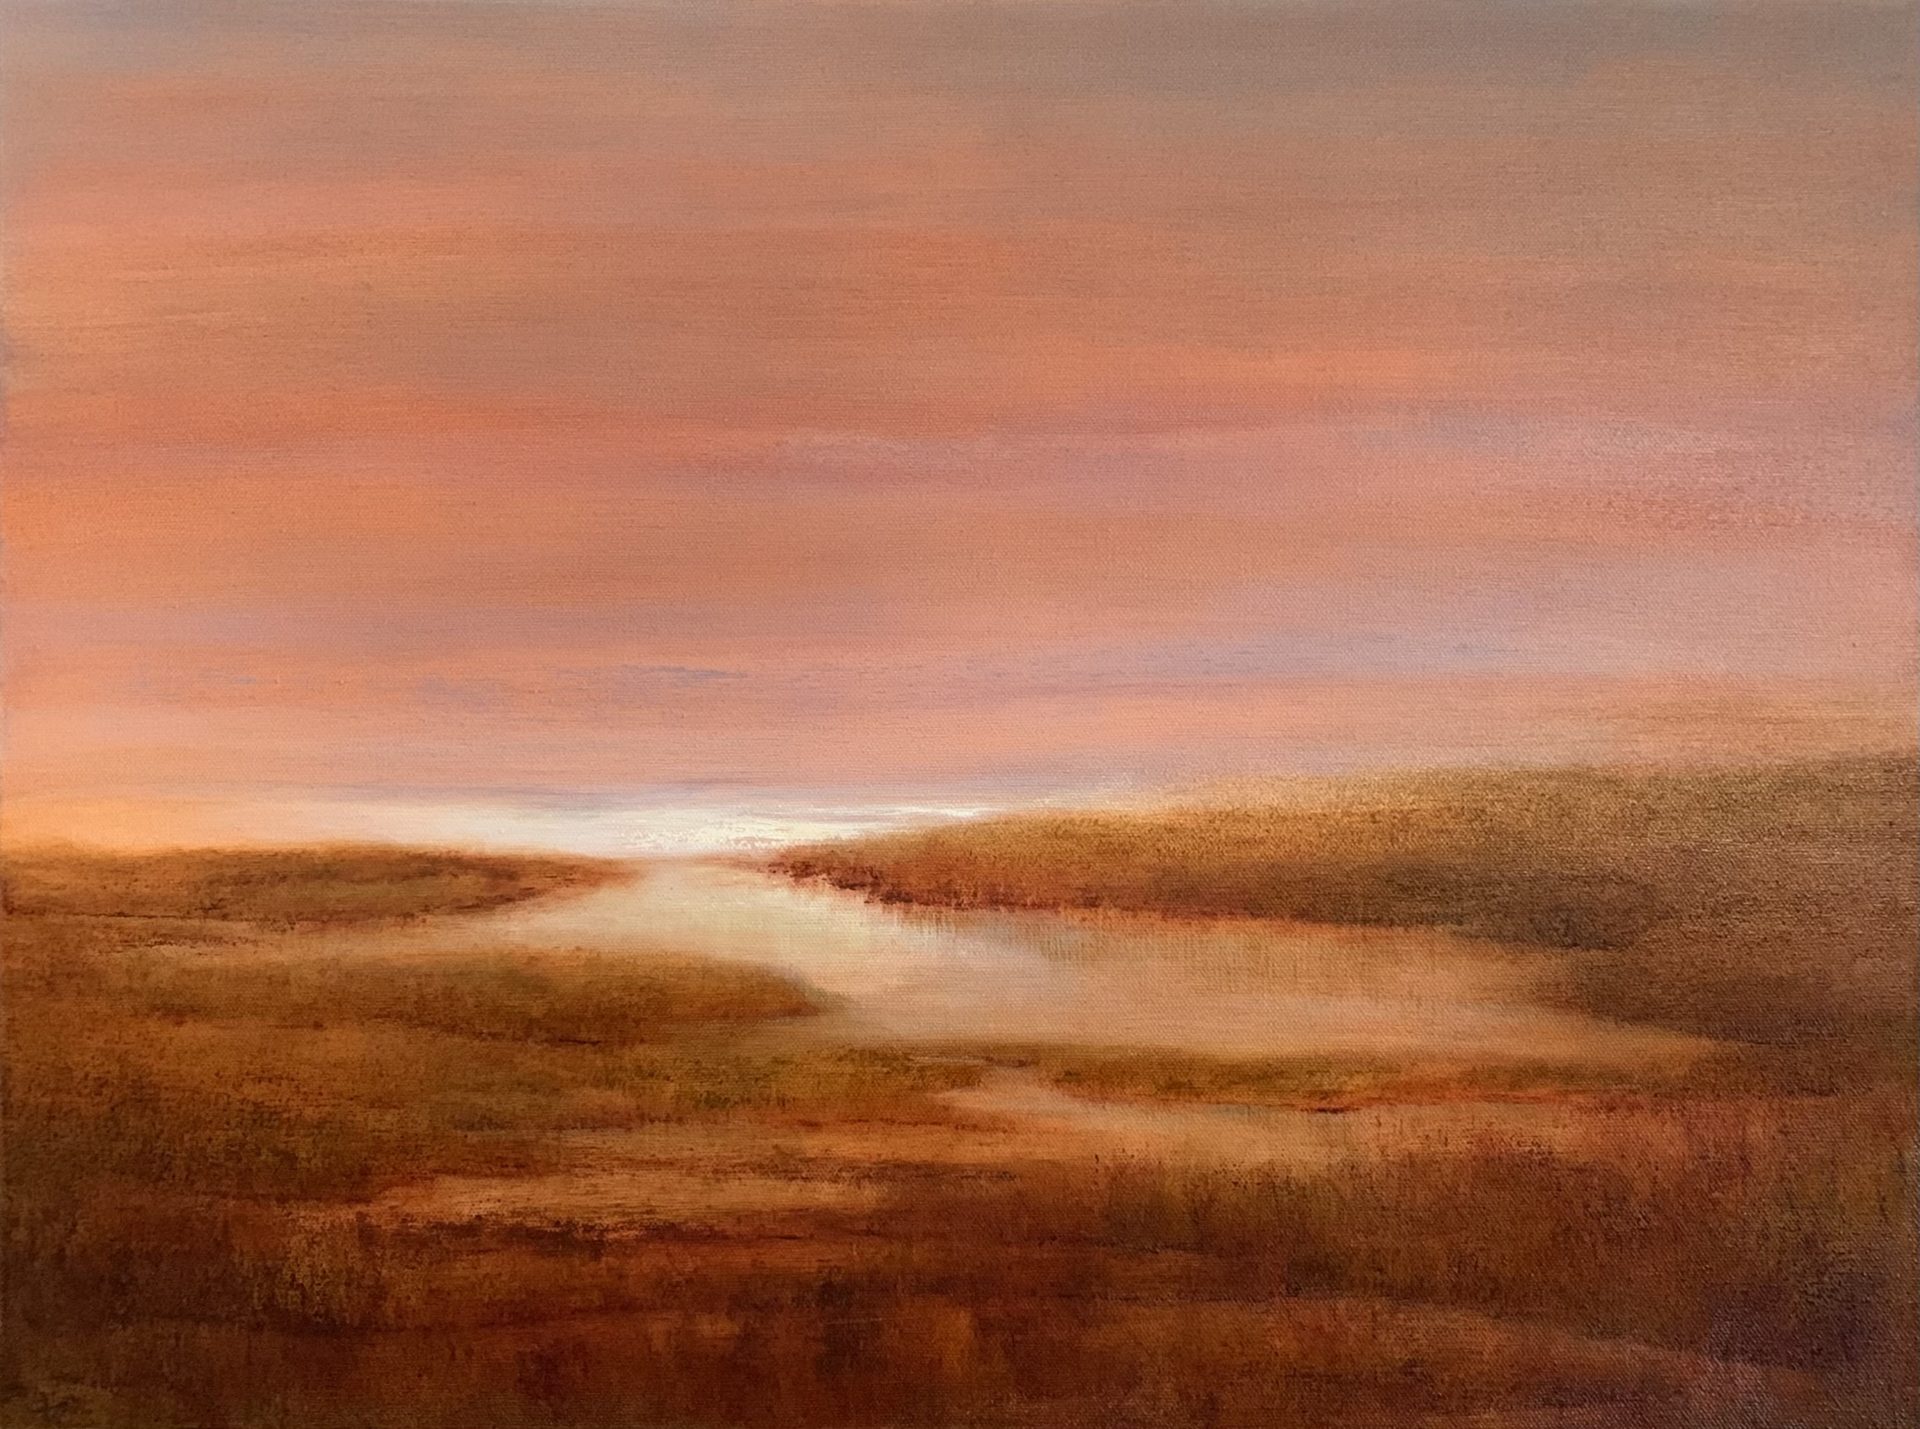 Original landscape oil painting by Tisha Mark, "Quiet Mornings" 18"x24" oil on canvas (2023). Painting of a marsh landscape underneath an orange-toned sunrise sky.